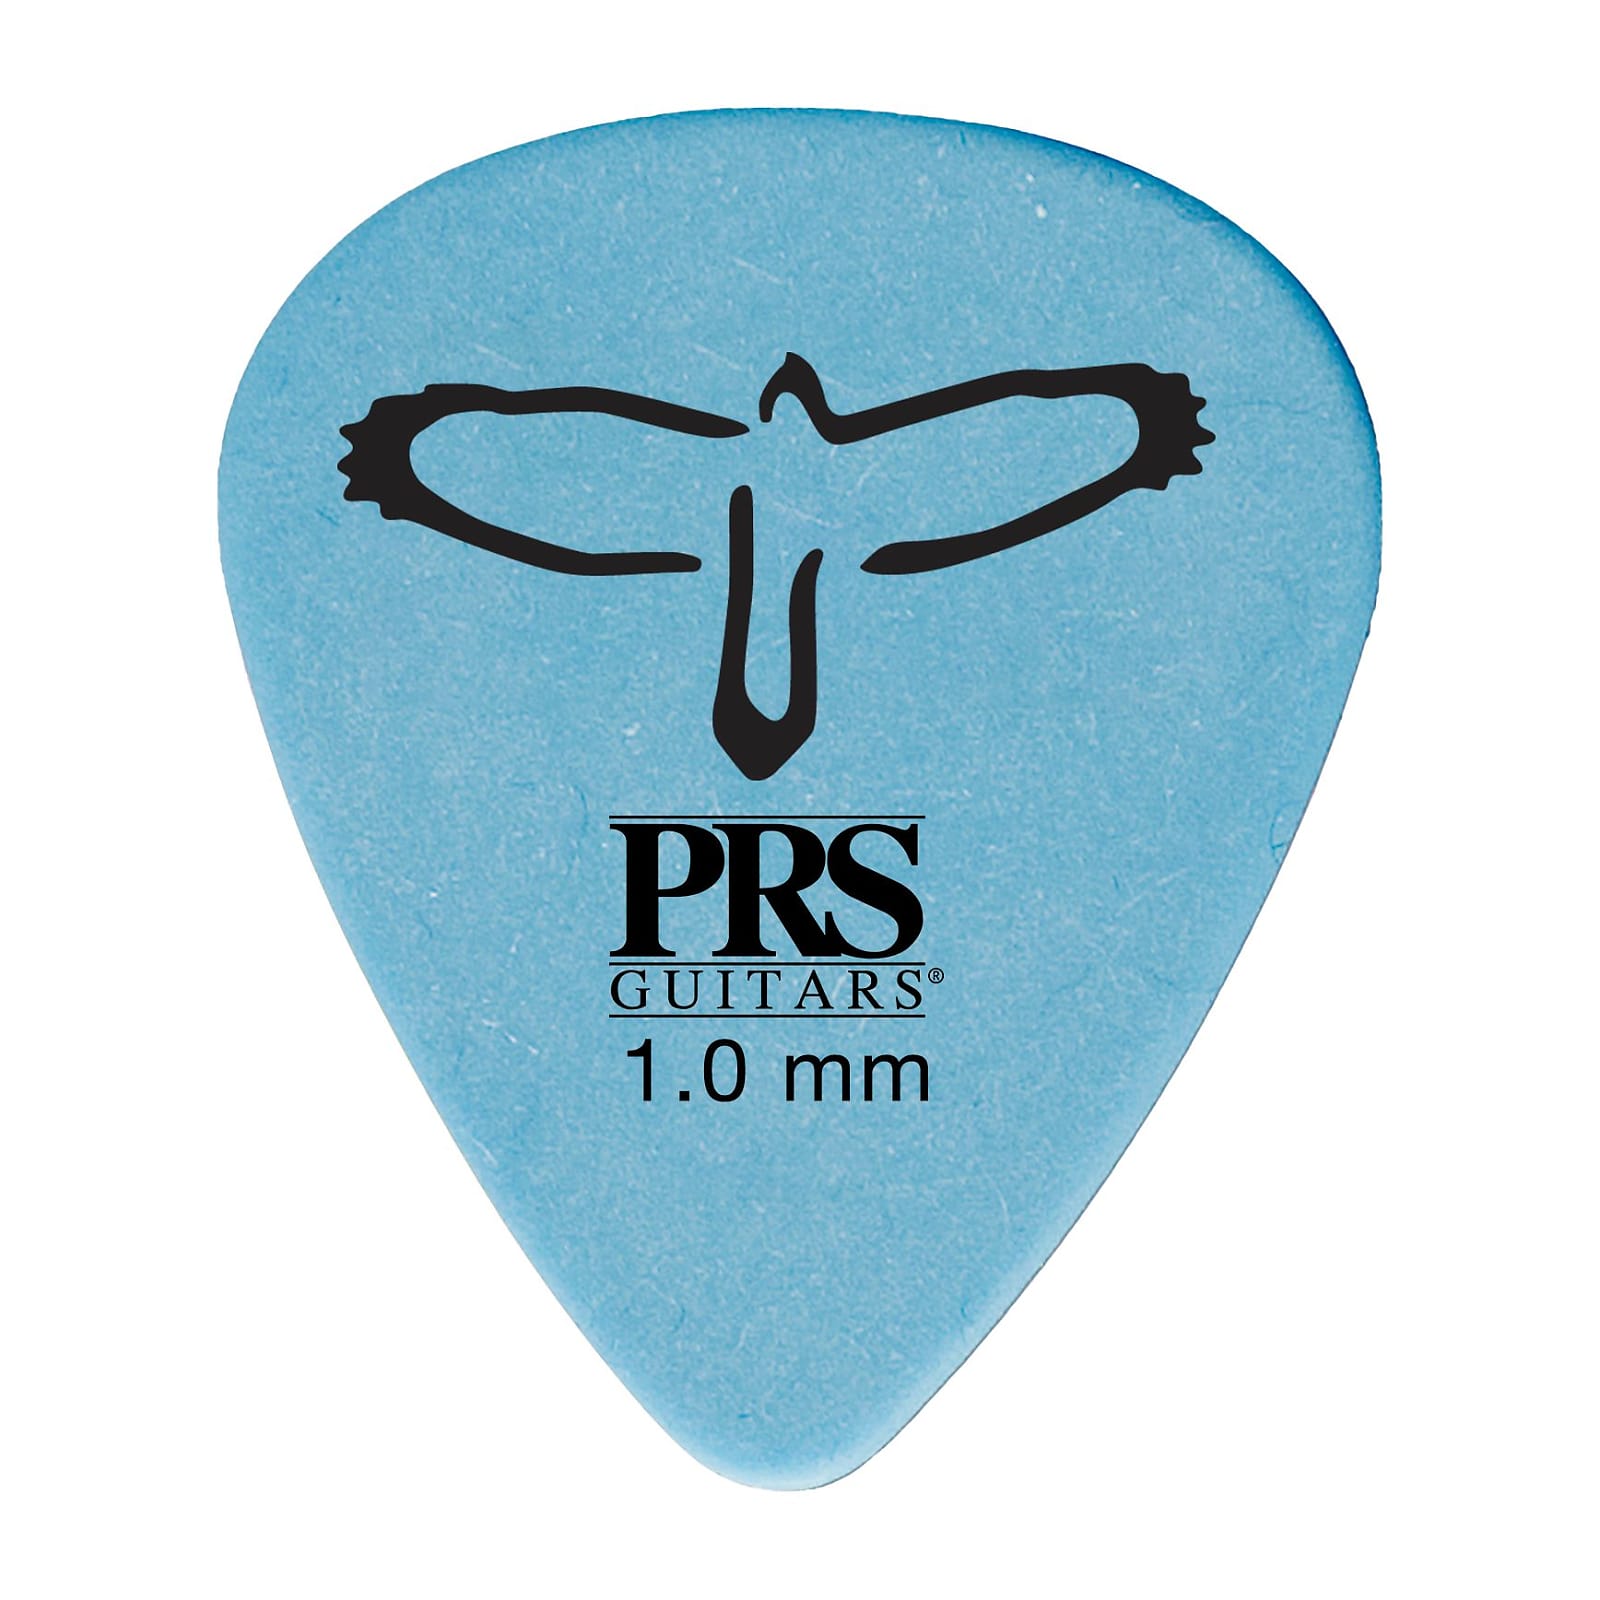 Paul Reed Smith PRS Delrin Guitar Picks (12) (1.00mm - Blue)